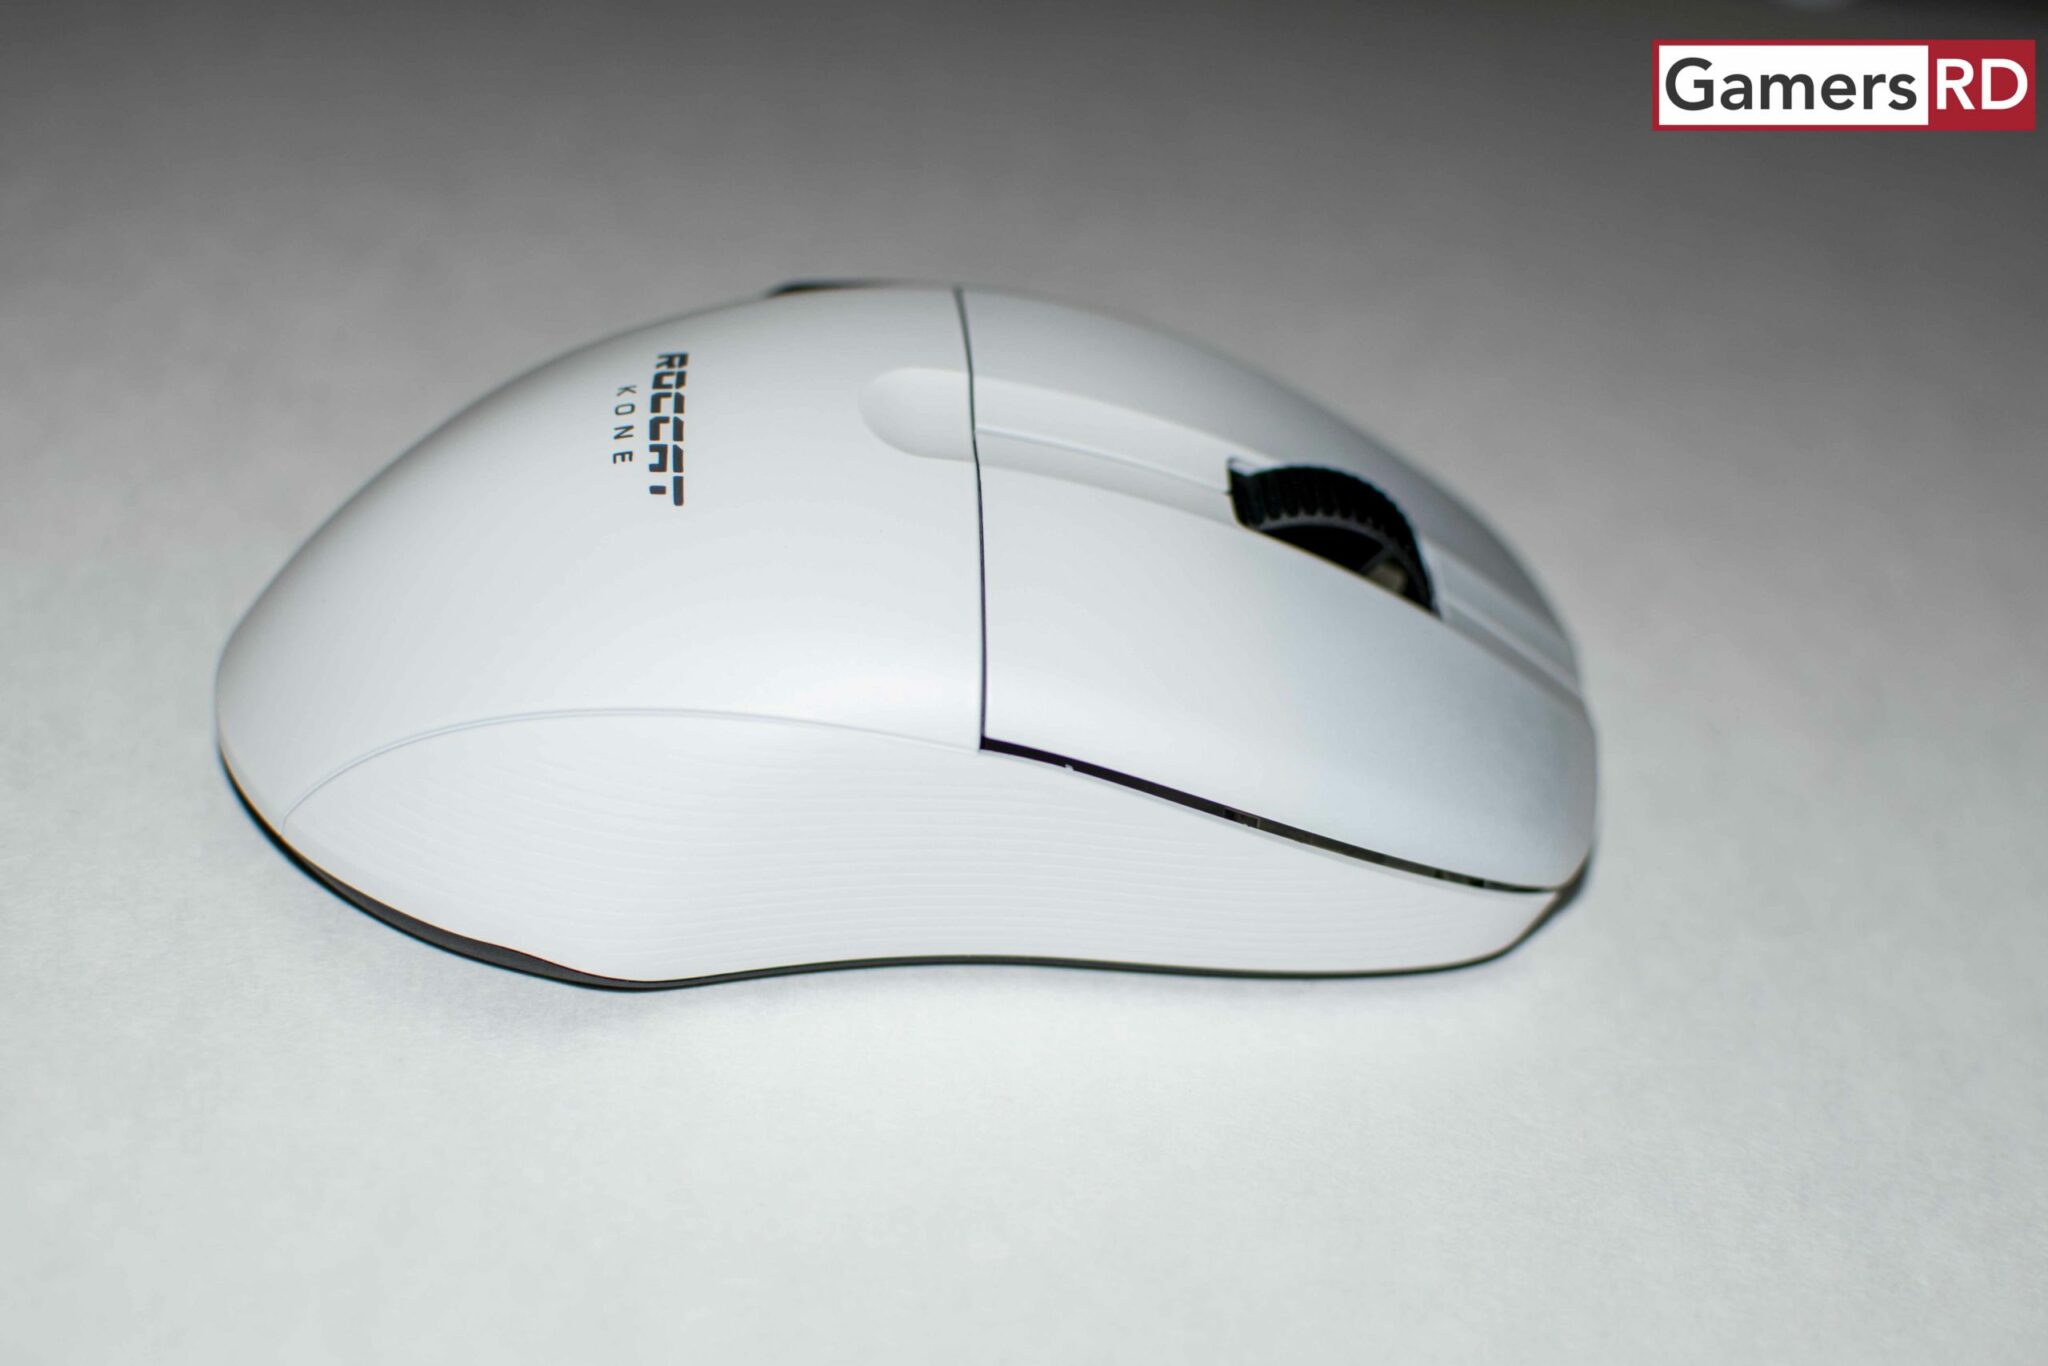 ROCCAT Kone Pro Air Gaming Mouse Review, 2 GamersRD